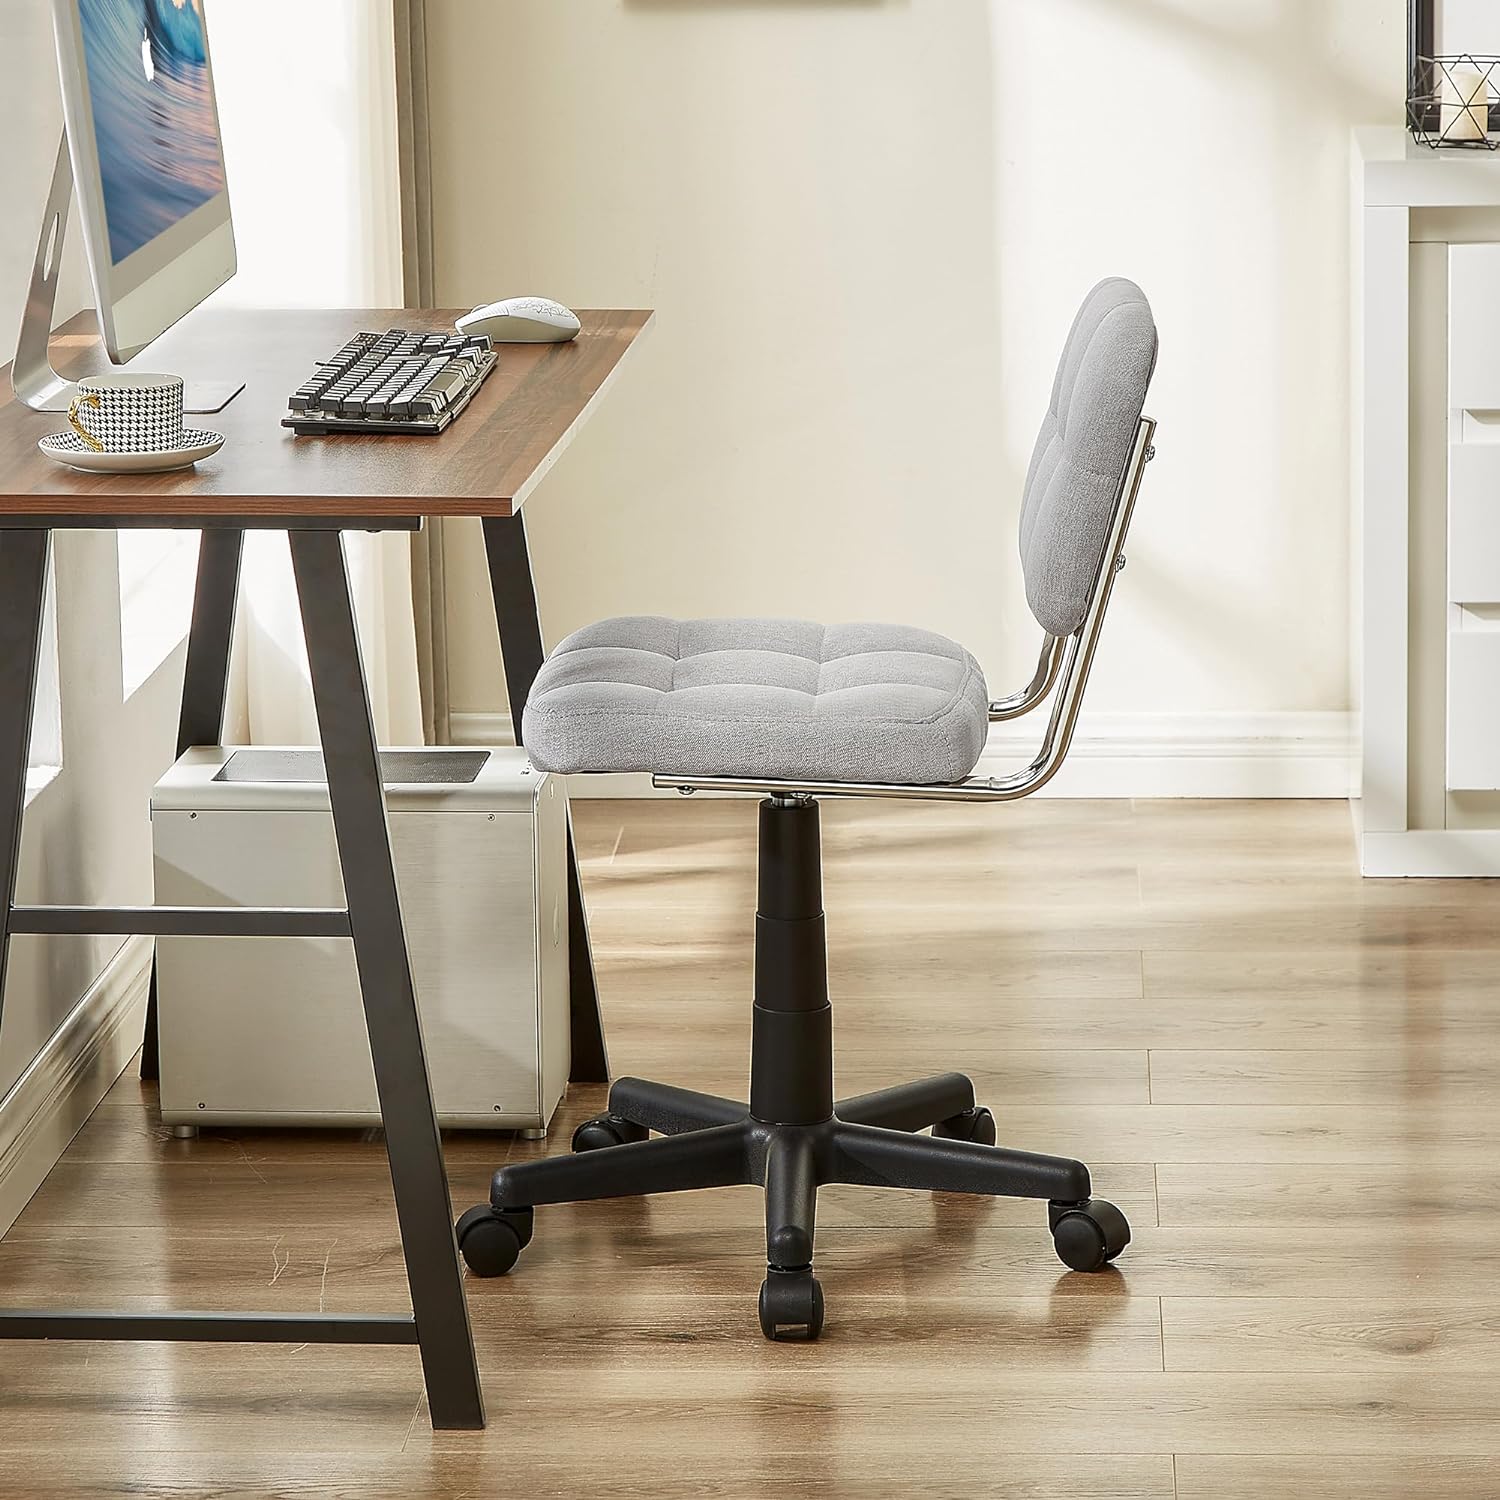 VECELO Modern Armless Home Office Desk Chair for Make Up/Bed Room/Small Space